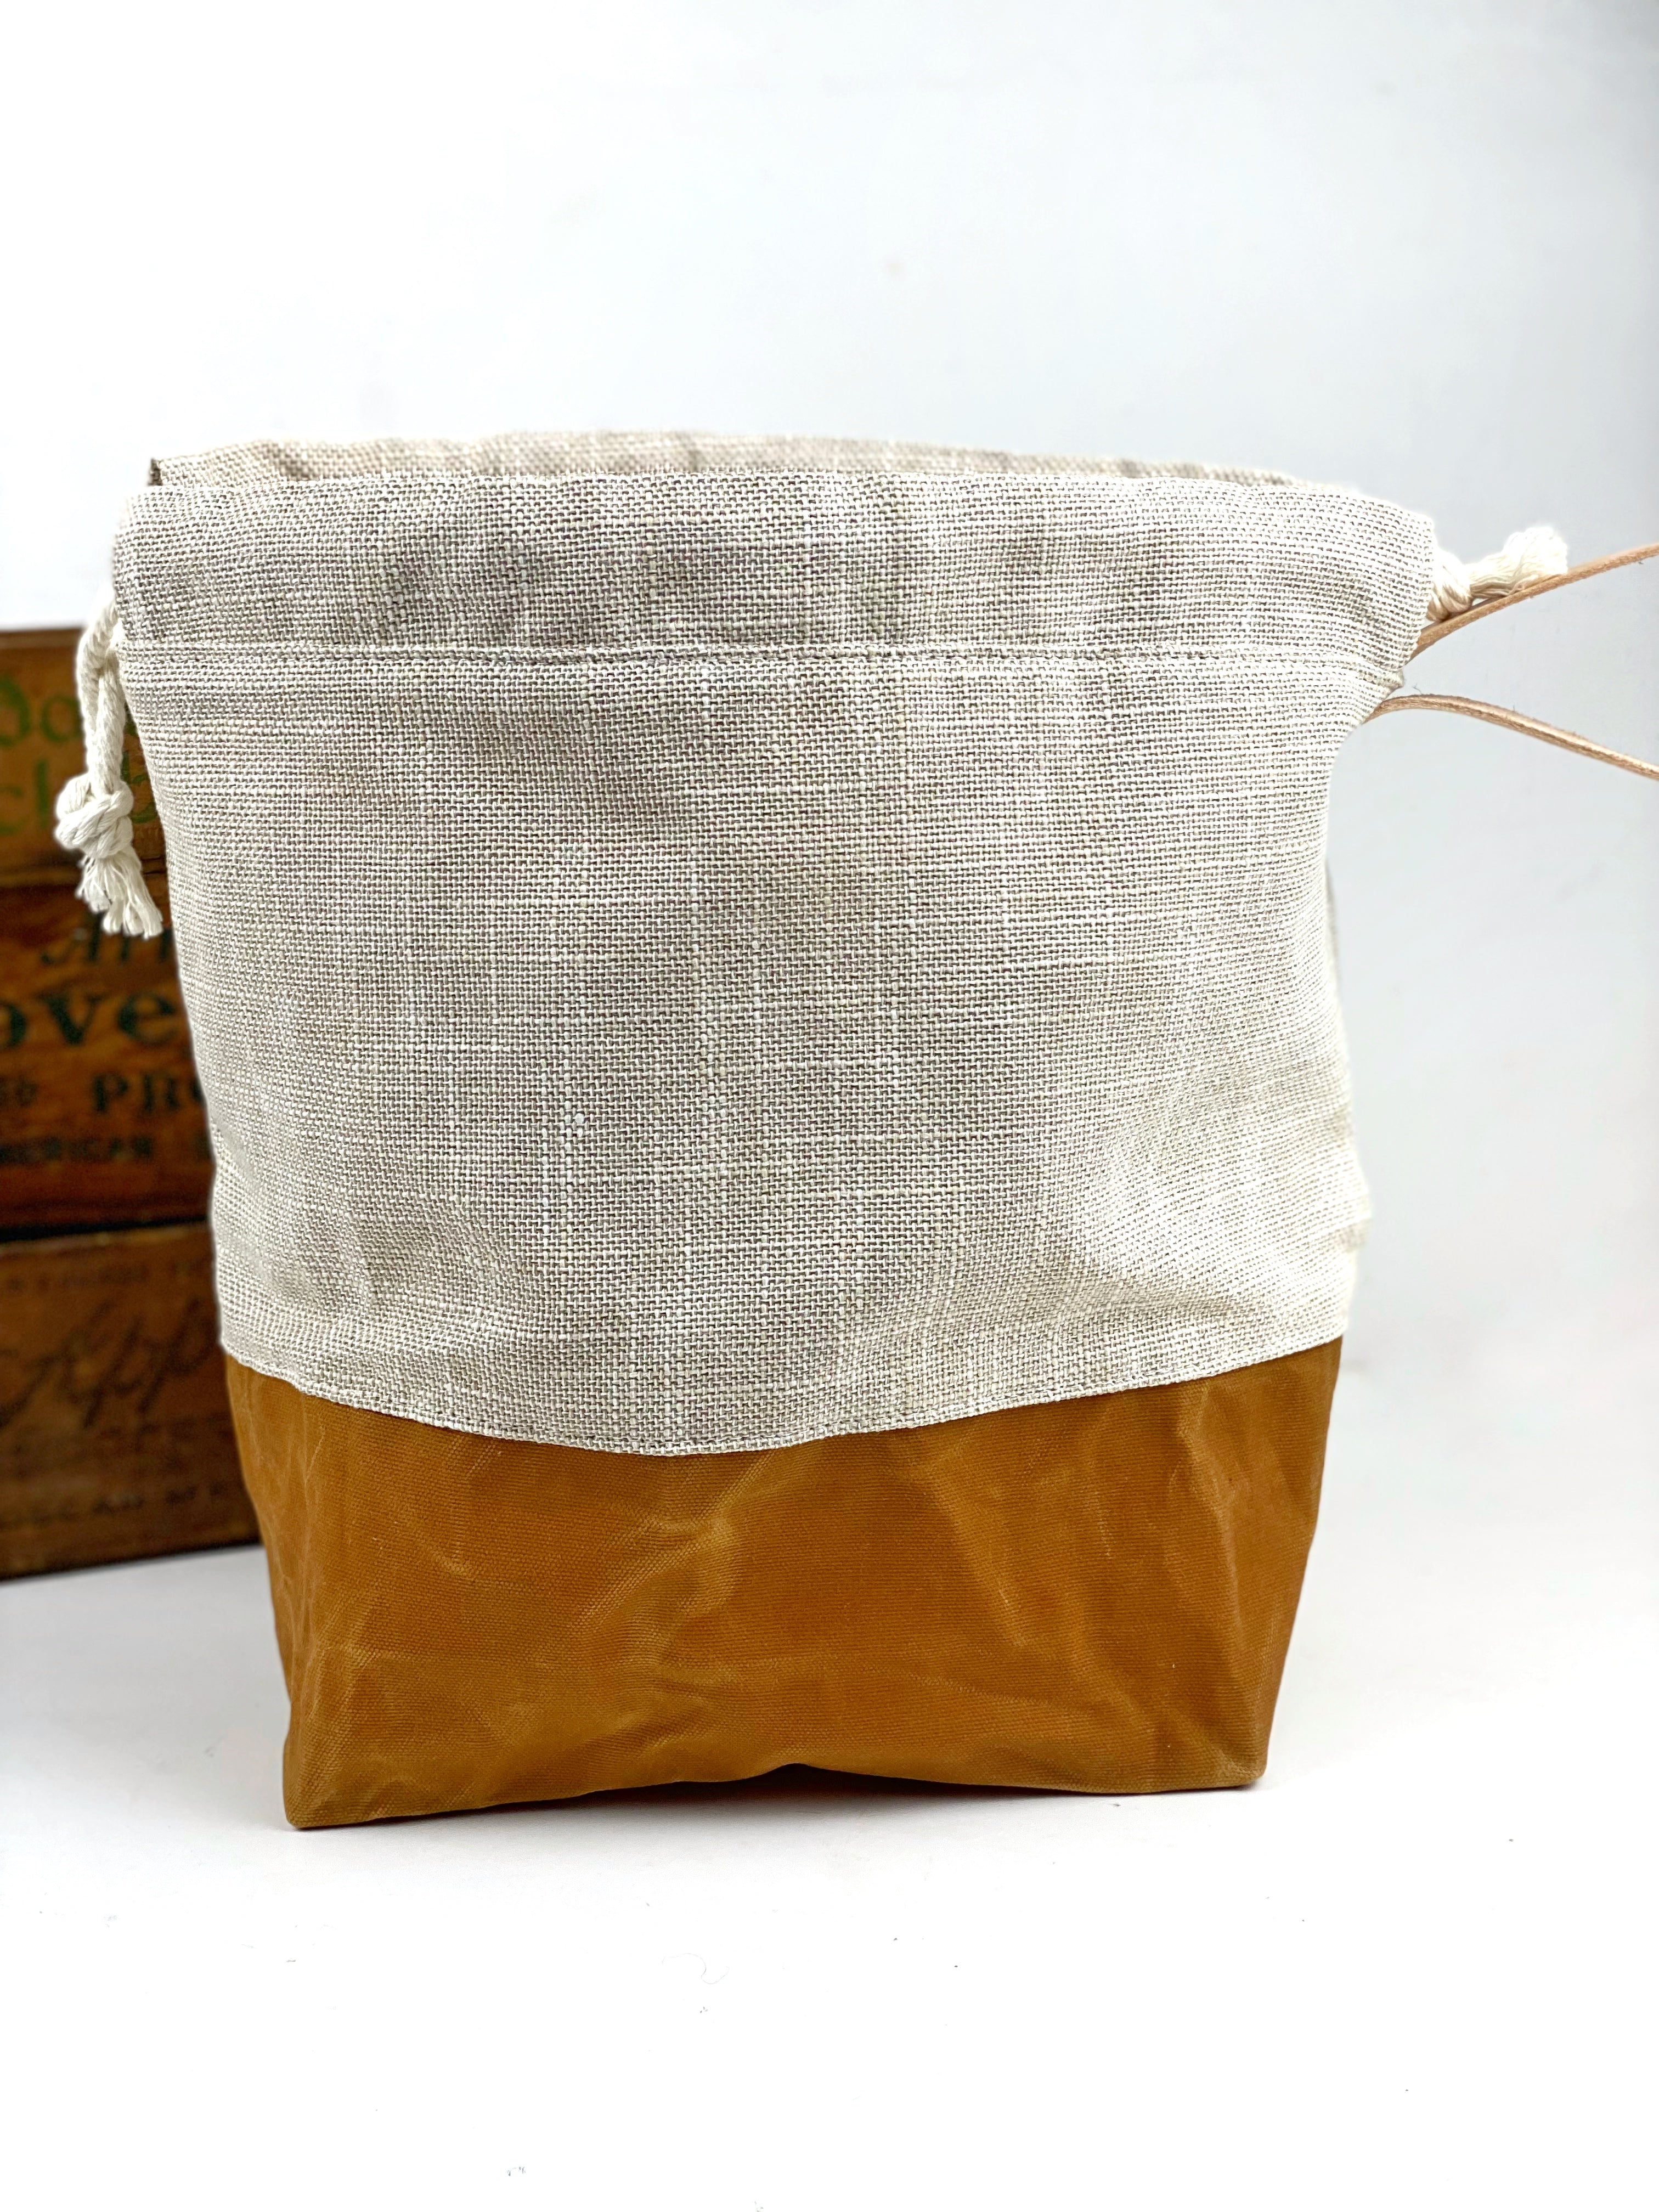 Small Business Owner Waxed Canvas Project Bag, Canvas Project Bag, Project Bag for Knitters, Knitting Bag